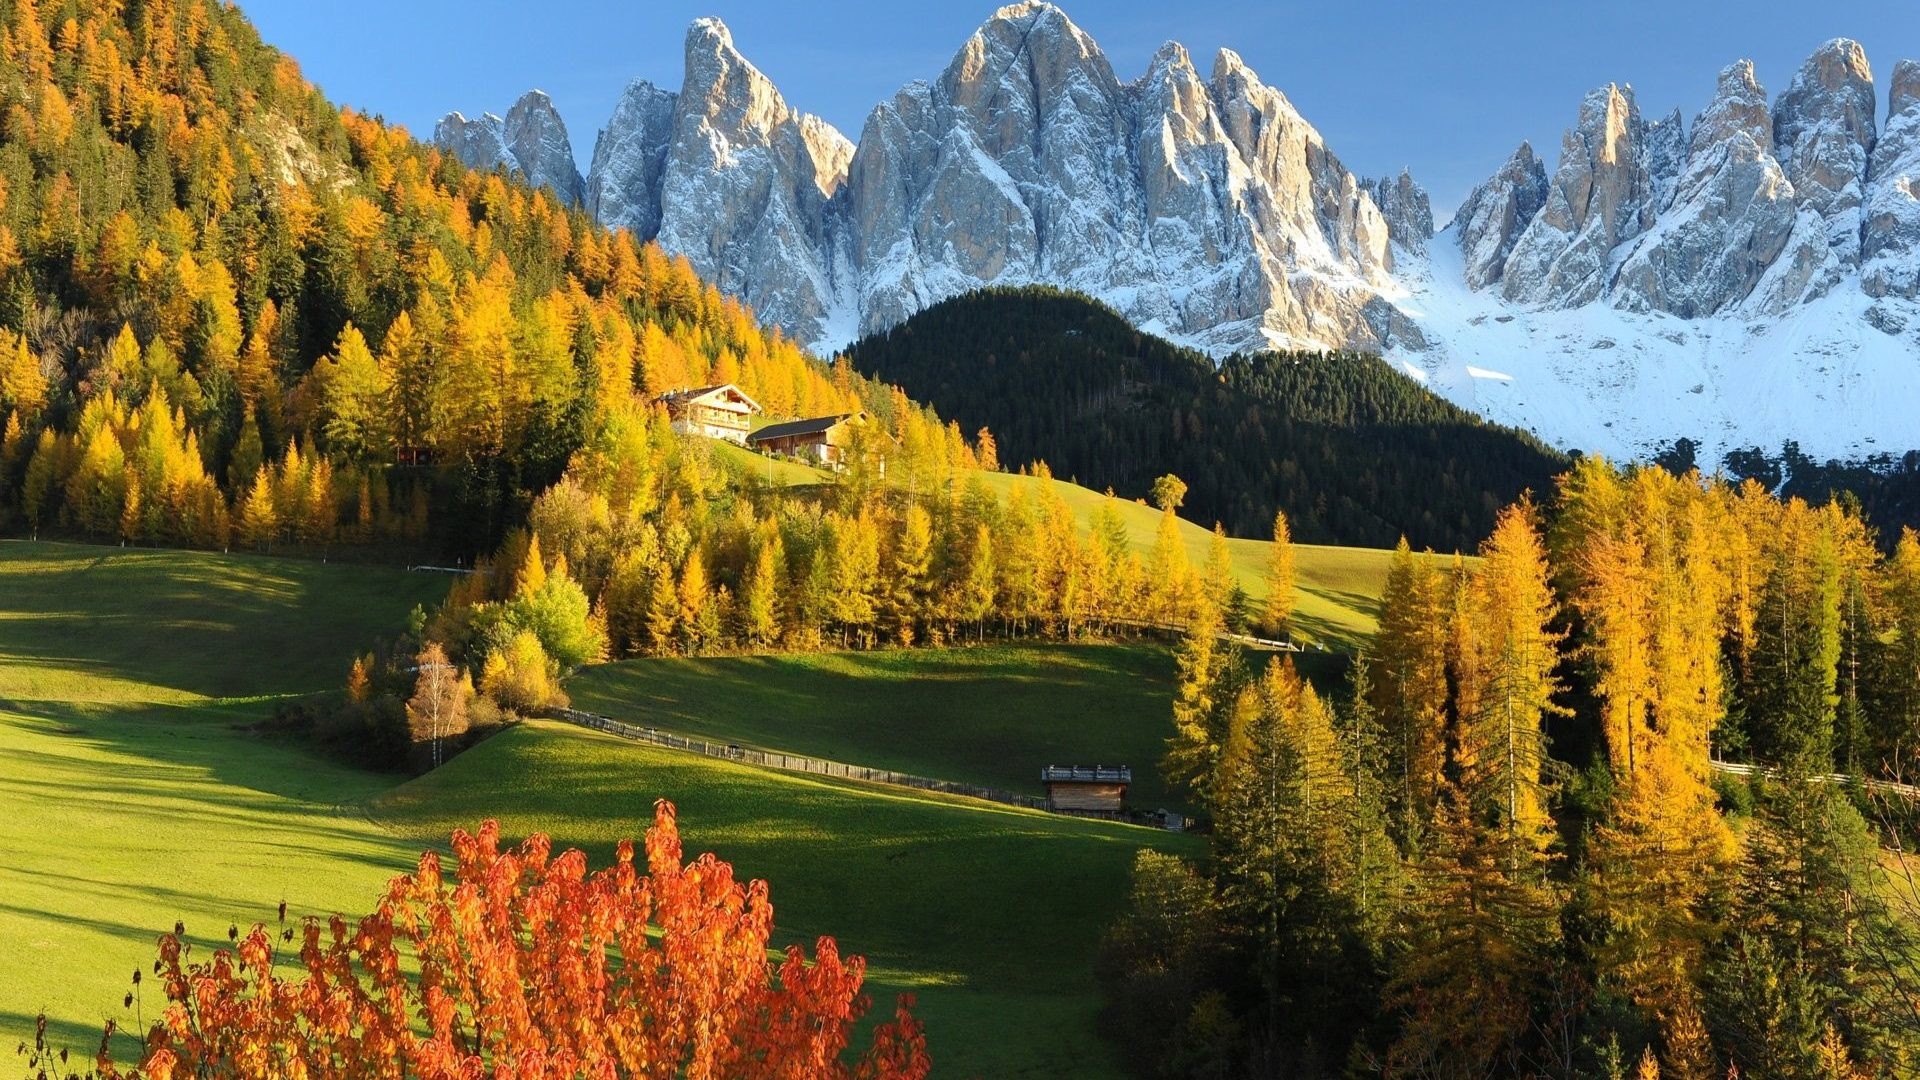 1920x1080 Mountain Alps Landscape Italian Nature Images Hd For Desktop Free Download  - 1920x1200